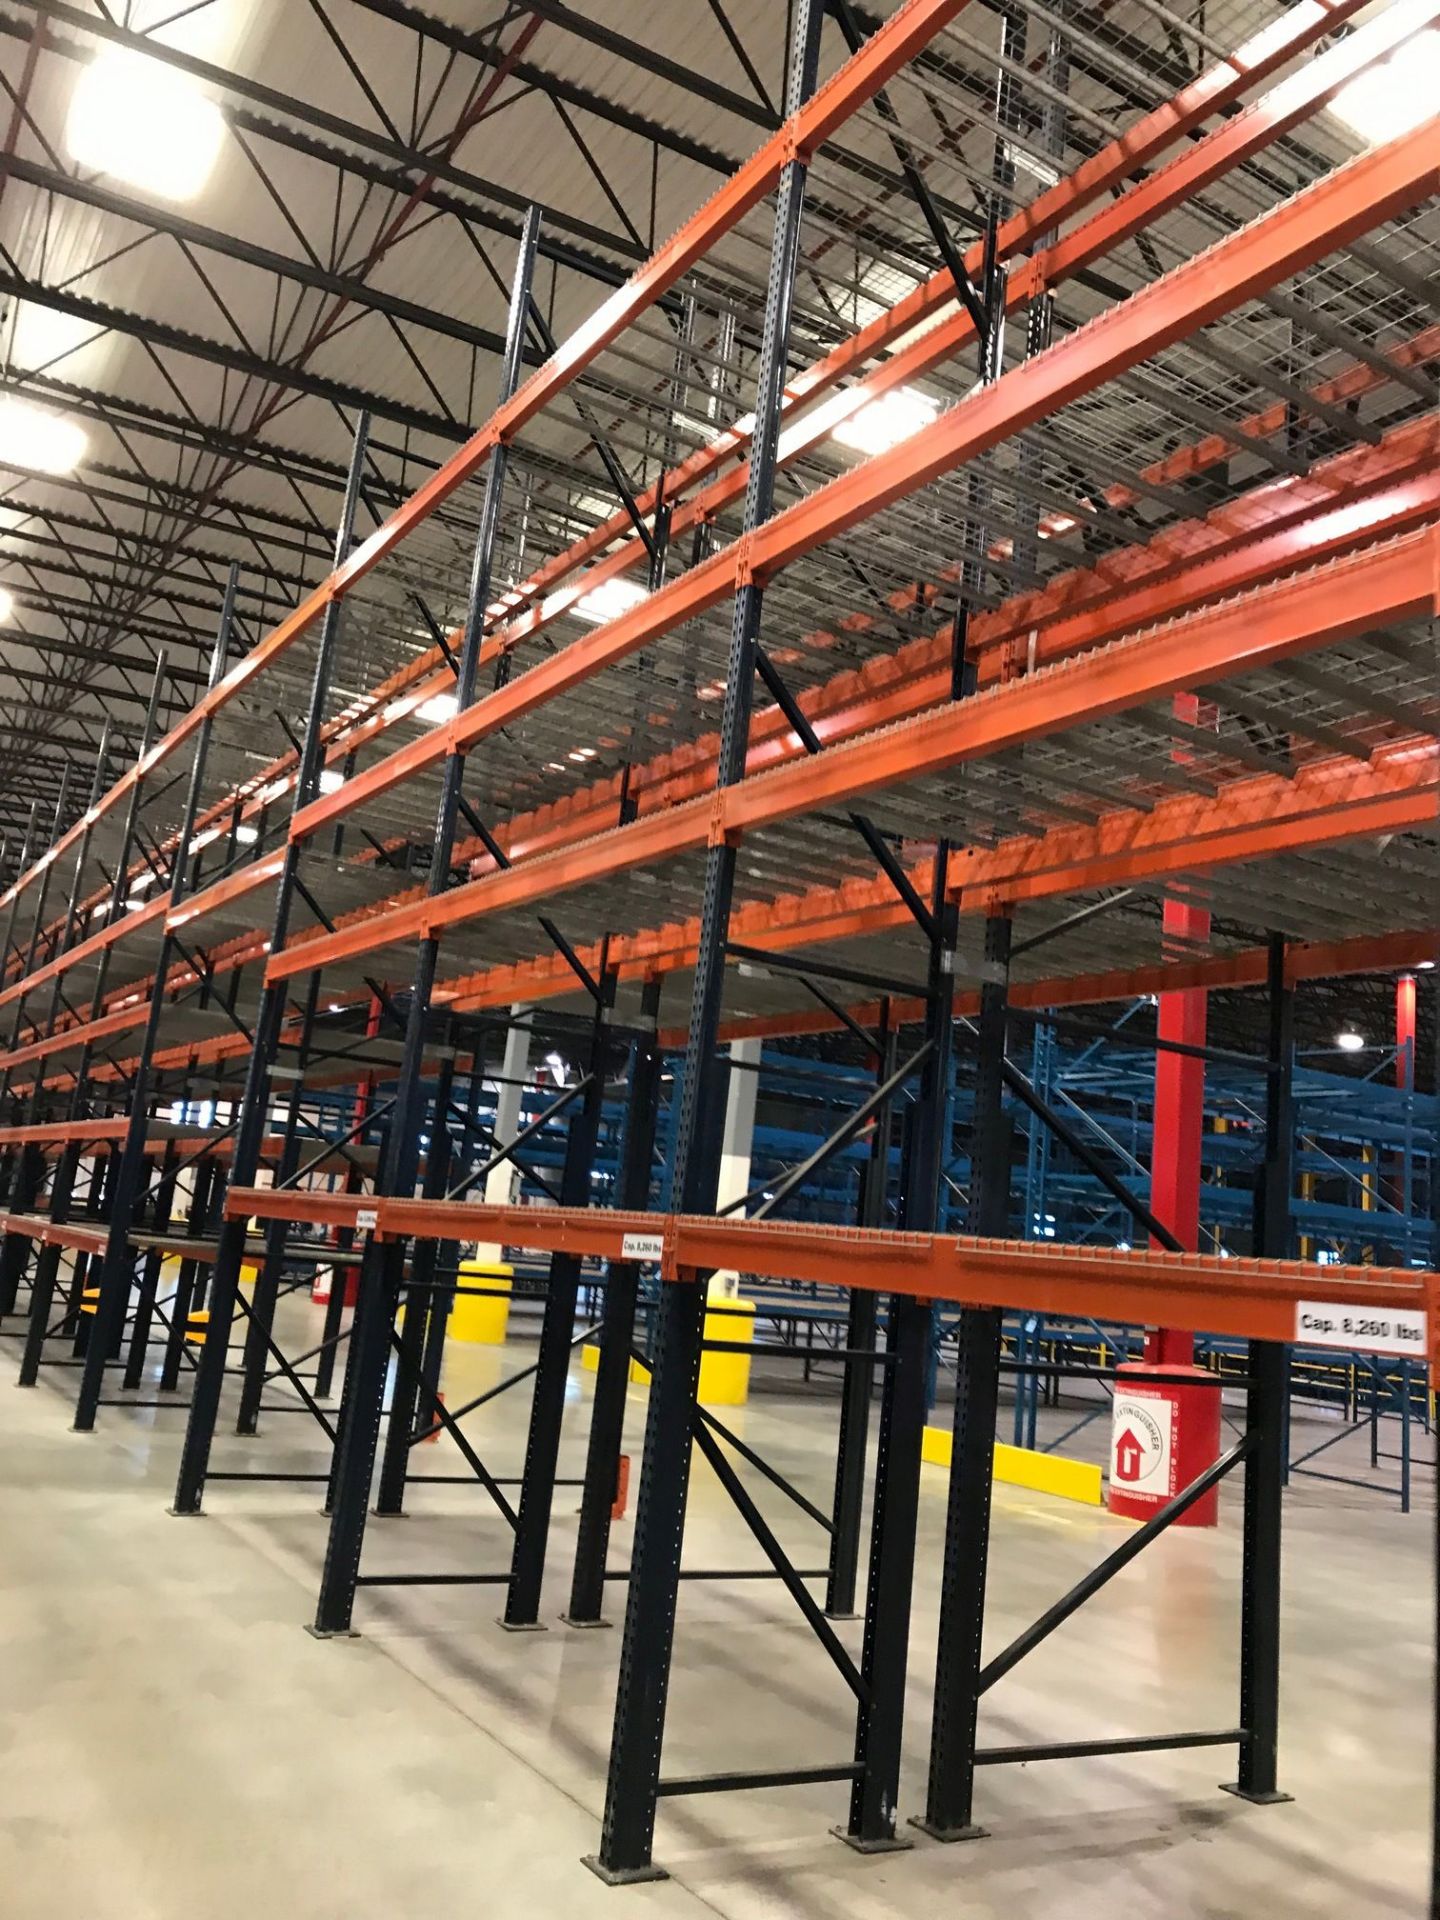 SECTIONS 60" X 108" X 288" TEARDROP TYPE ADJUSTABLE BEAM PALLET RACK WITH WIRE DECKING, 6" HIGH - Image 7 of 13